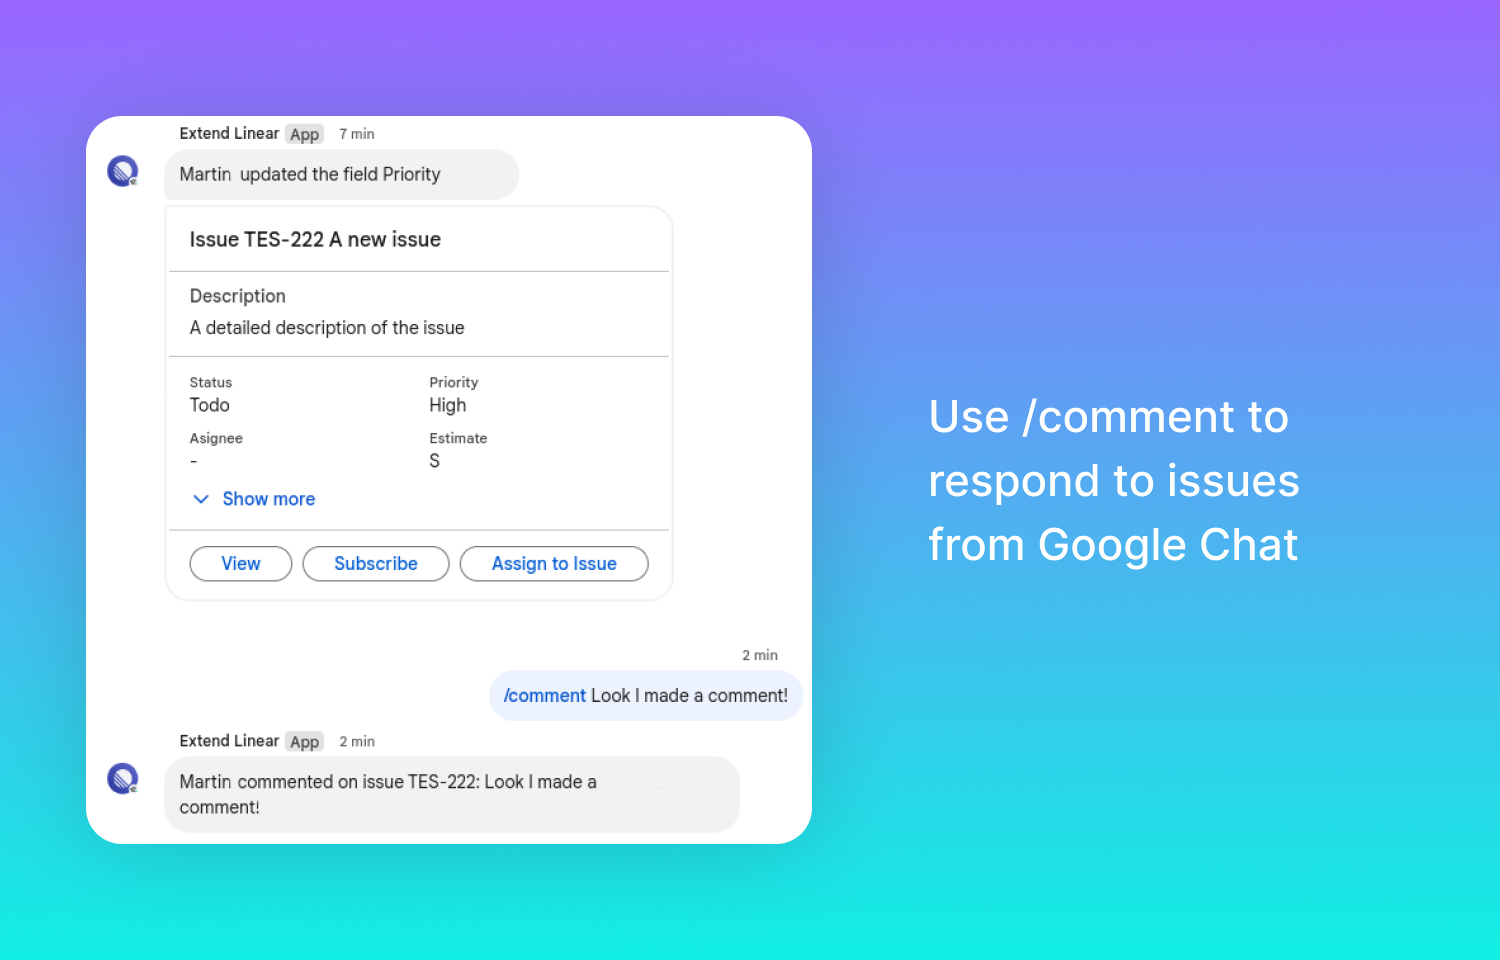 Google chat interface with a Linear action for commenting